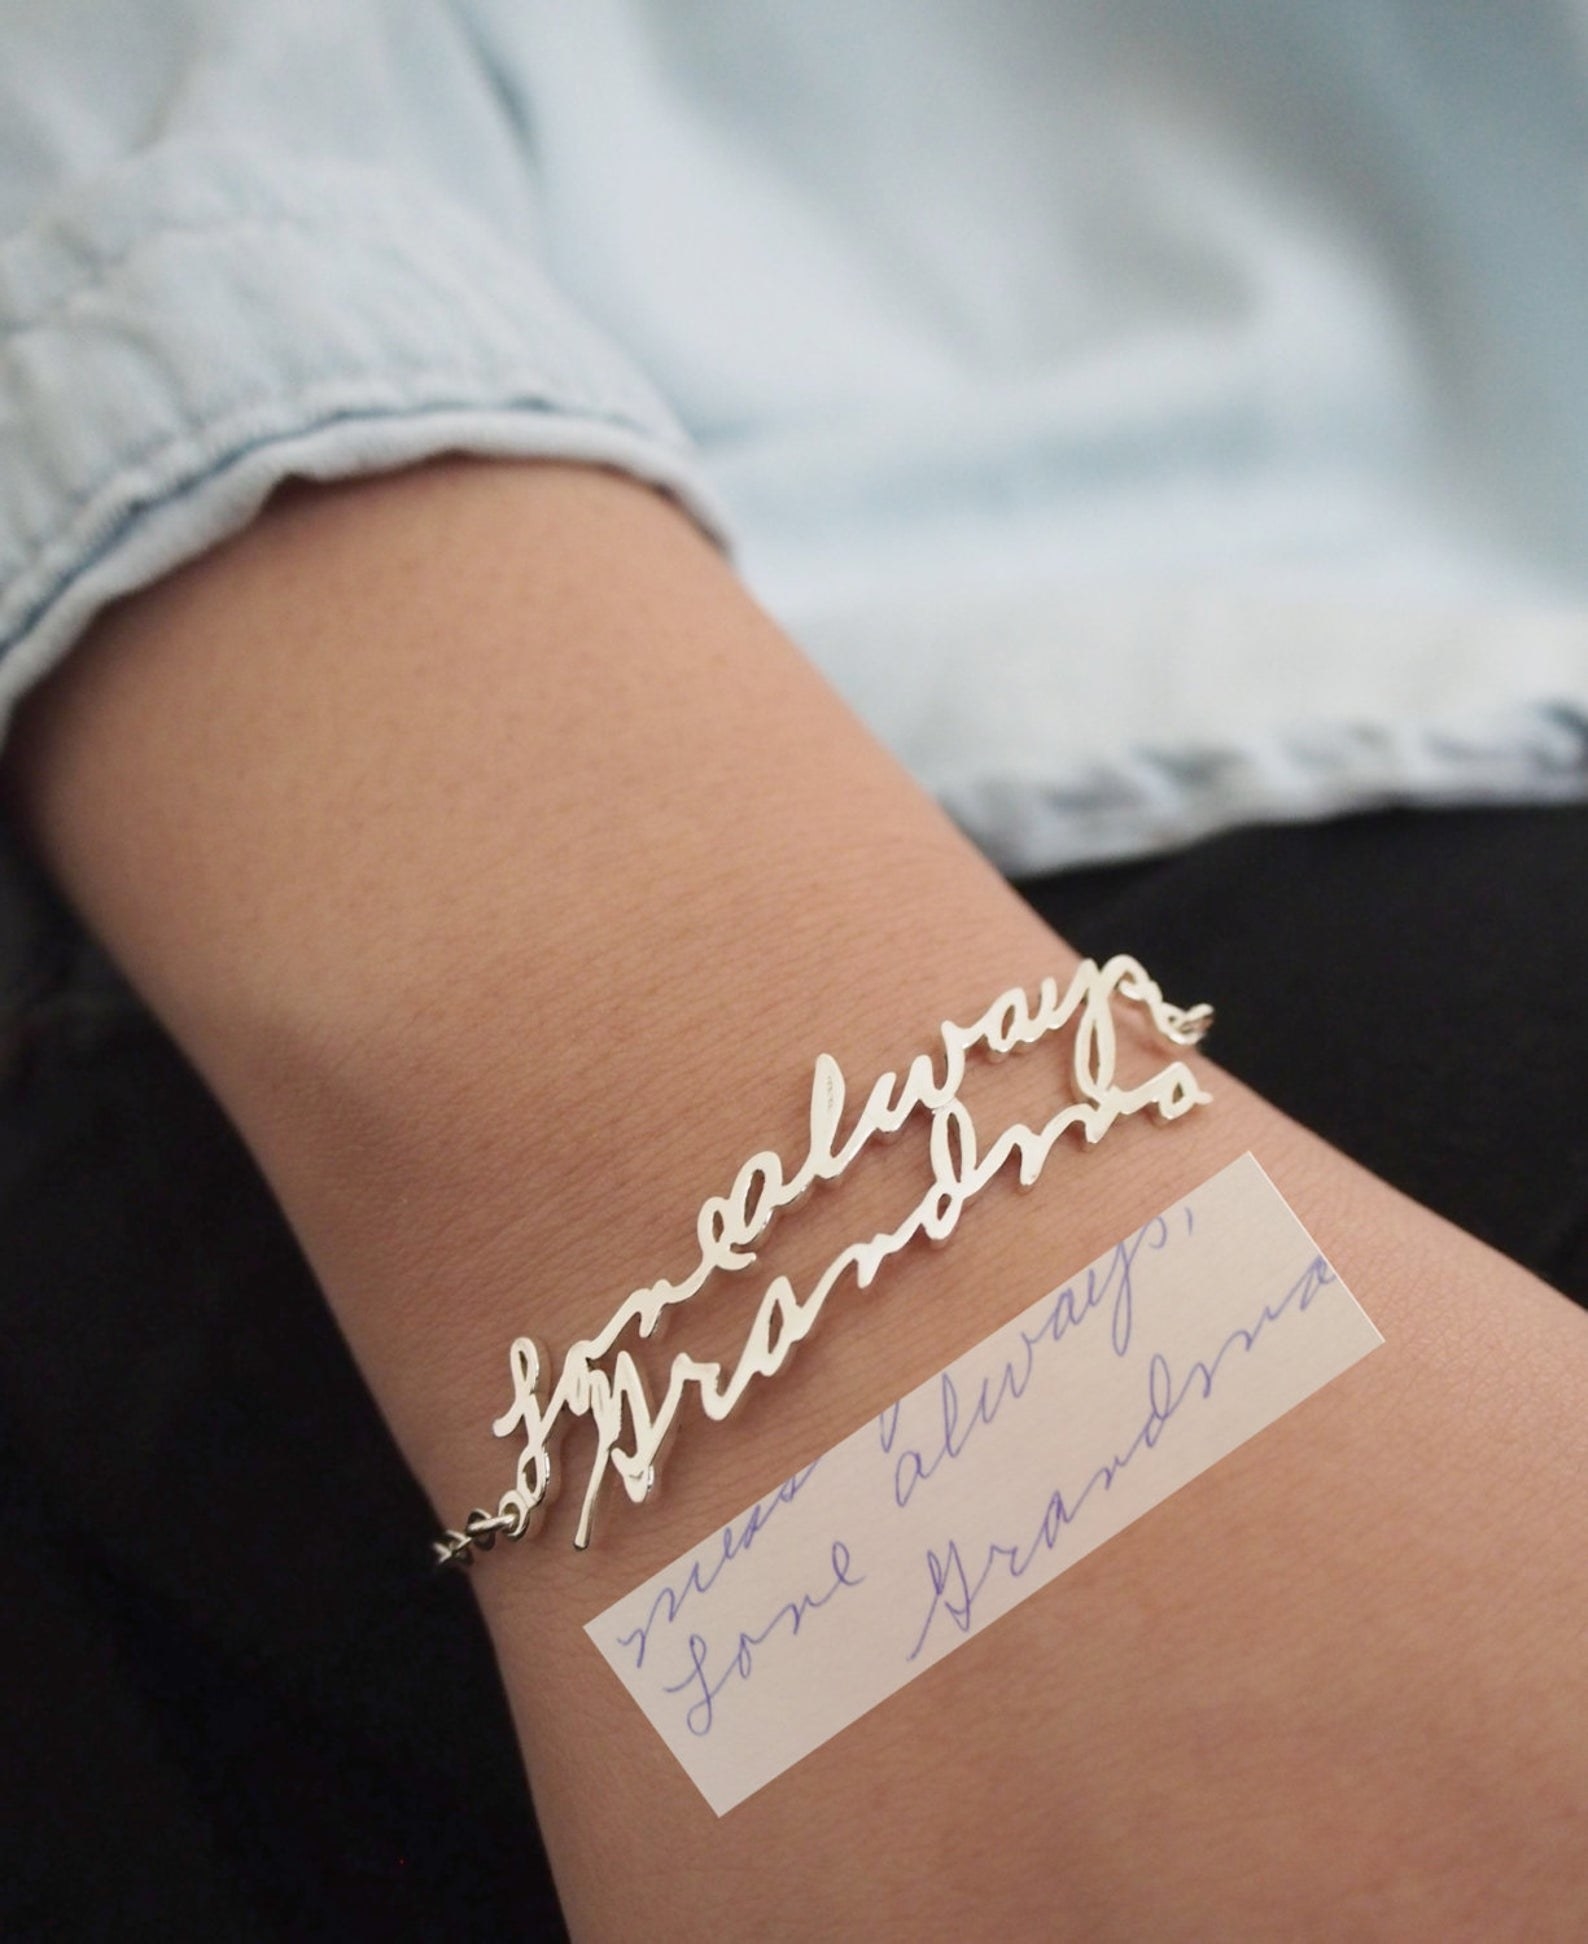 close-up of a model wearing a bracelet featuring golden words from a note form their grandma. The bracelet says &quot;Love always, Grandma&quot; just like the handwritten note also in the image